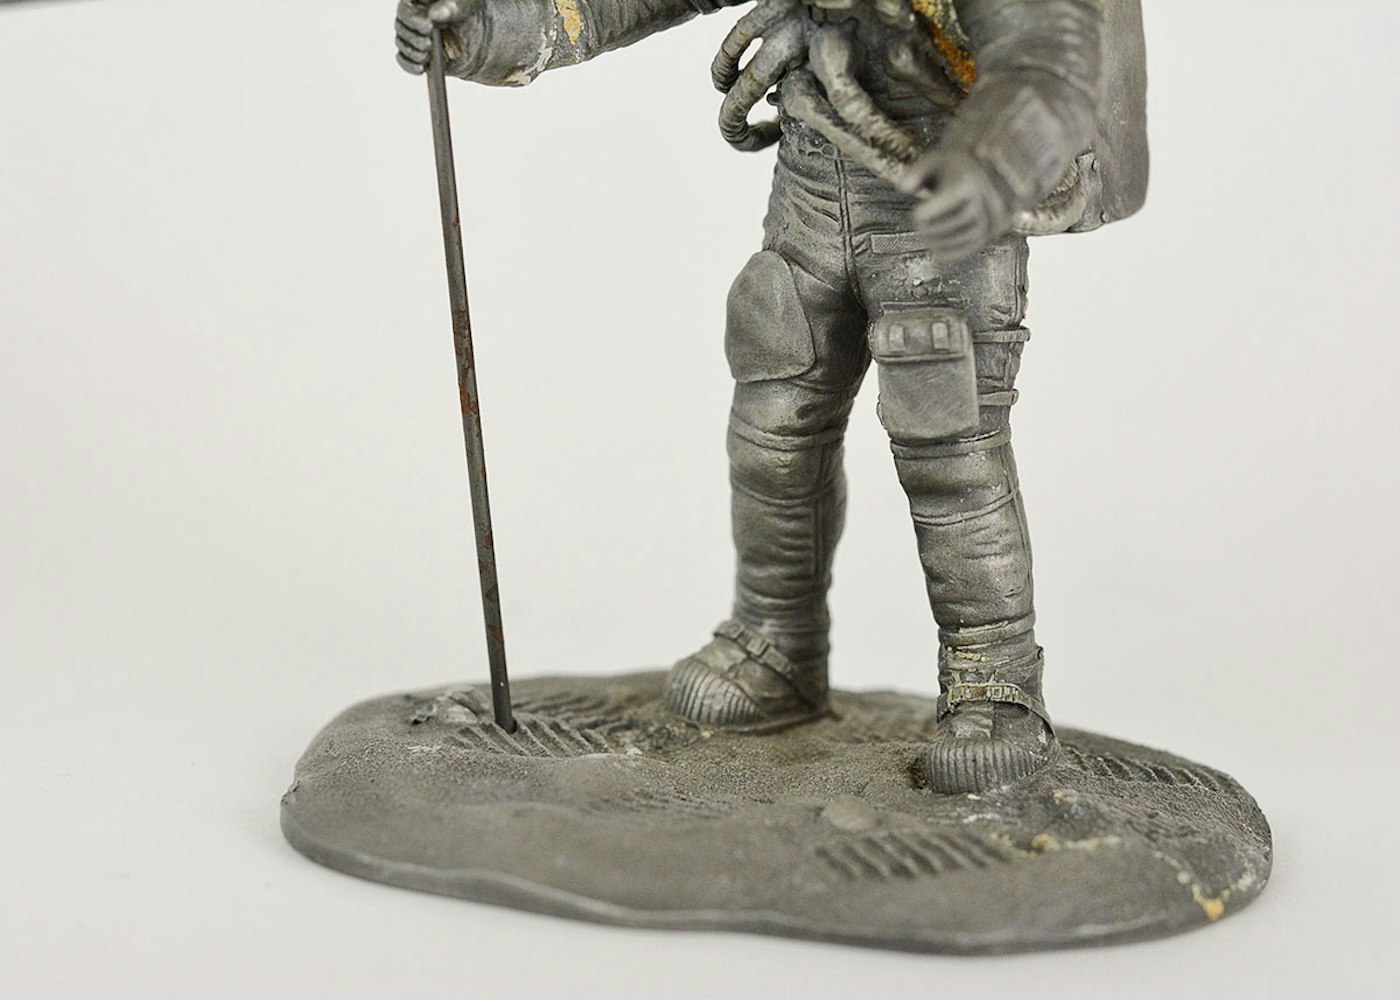 Collection of Pewter Commemorative Figurines by The Franklin Mint | EBTH